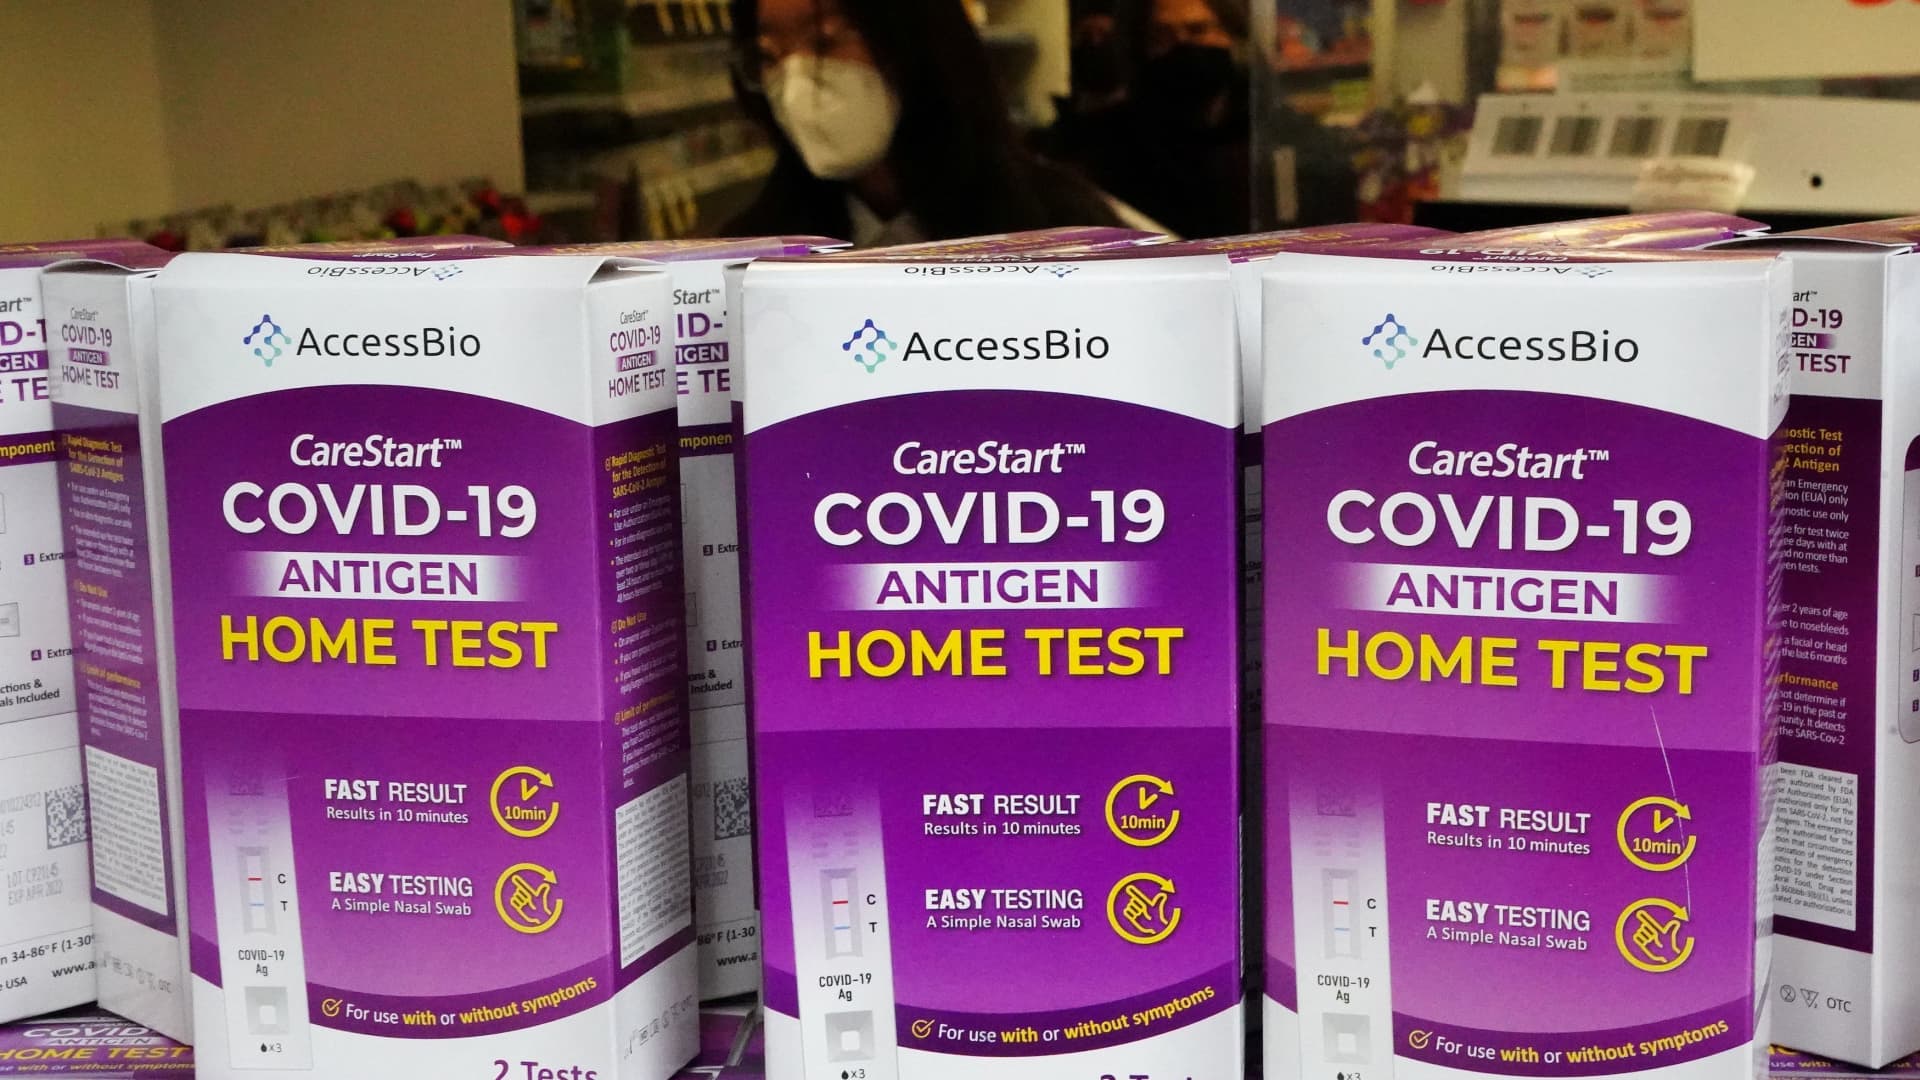 U.S. will again offer free at-home Covid tests starting Monday